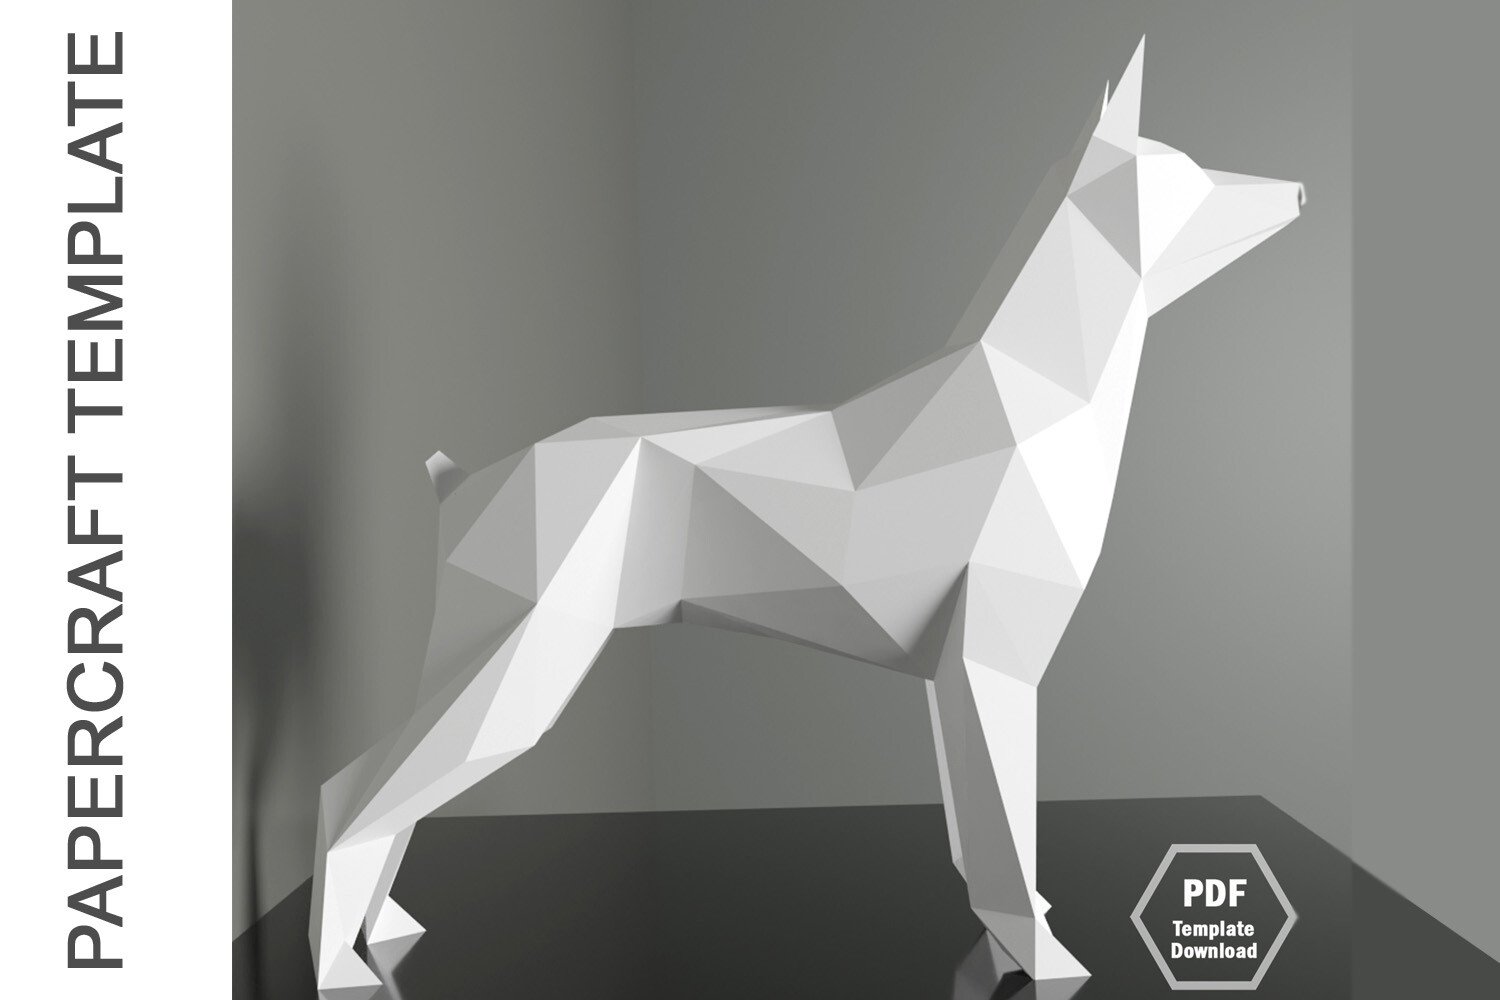 Dog Papercraft Low Poly (Download Now) 